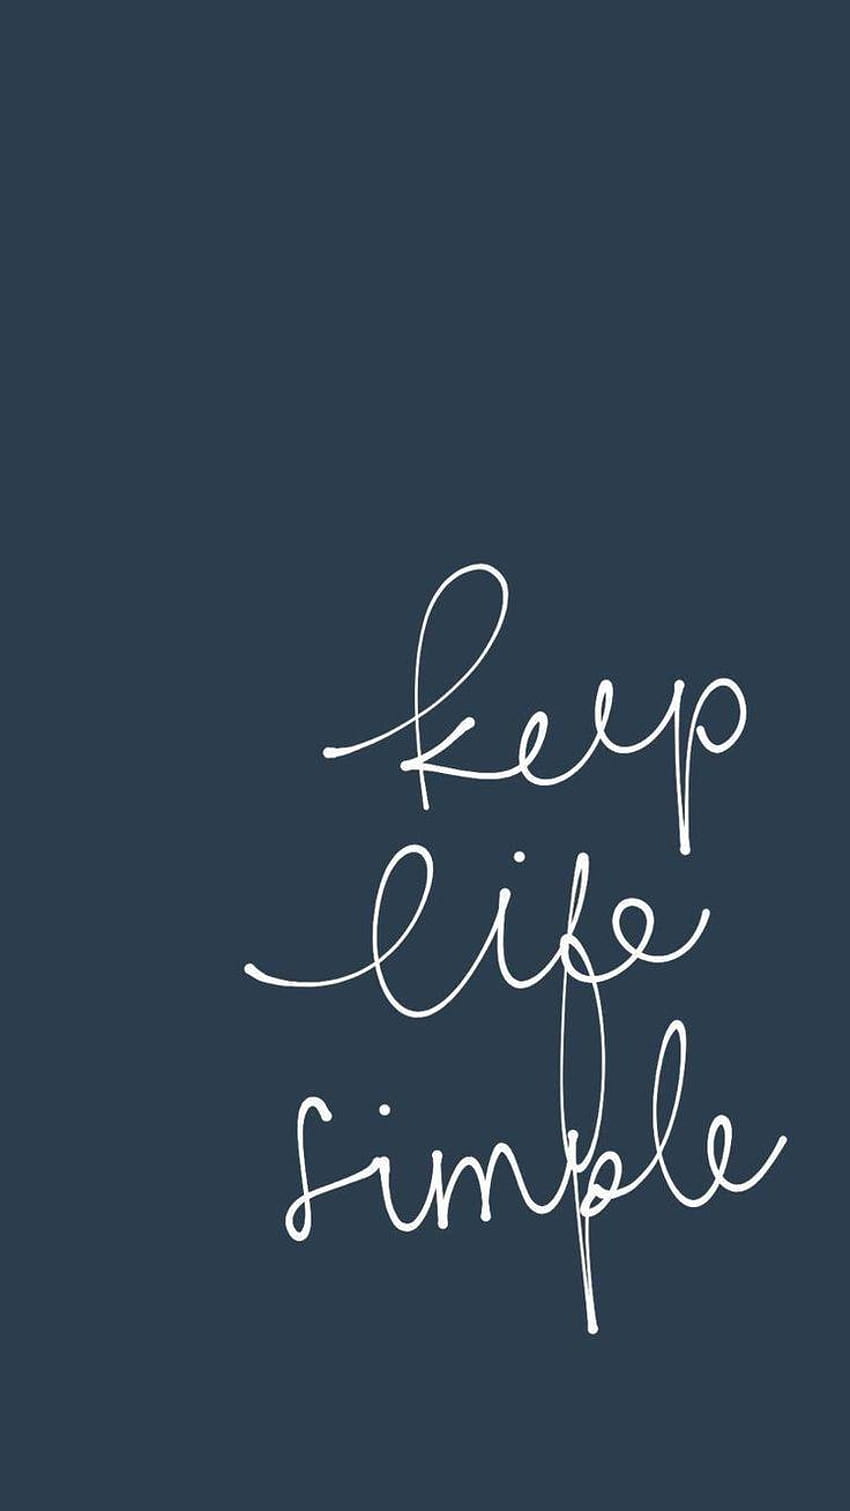 wallpapers with wordings on life